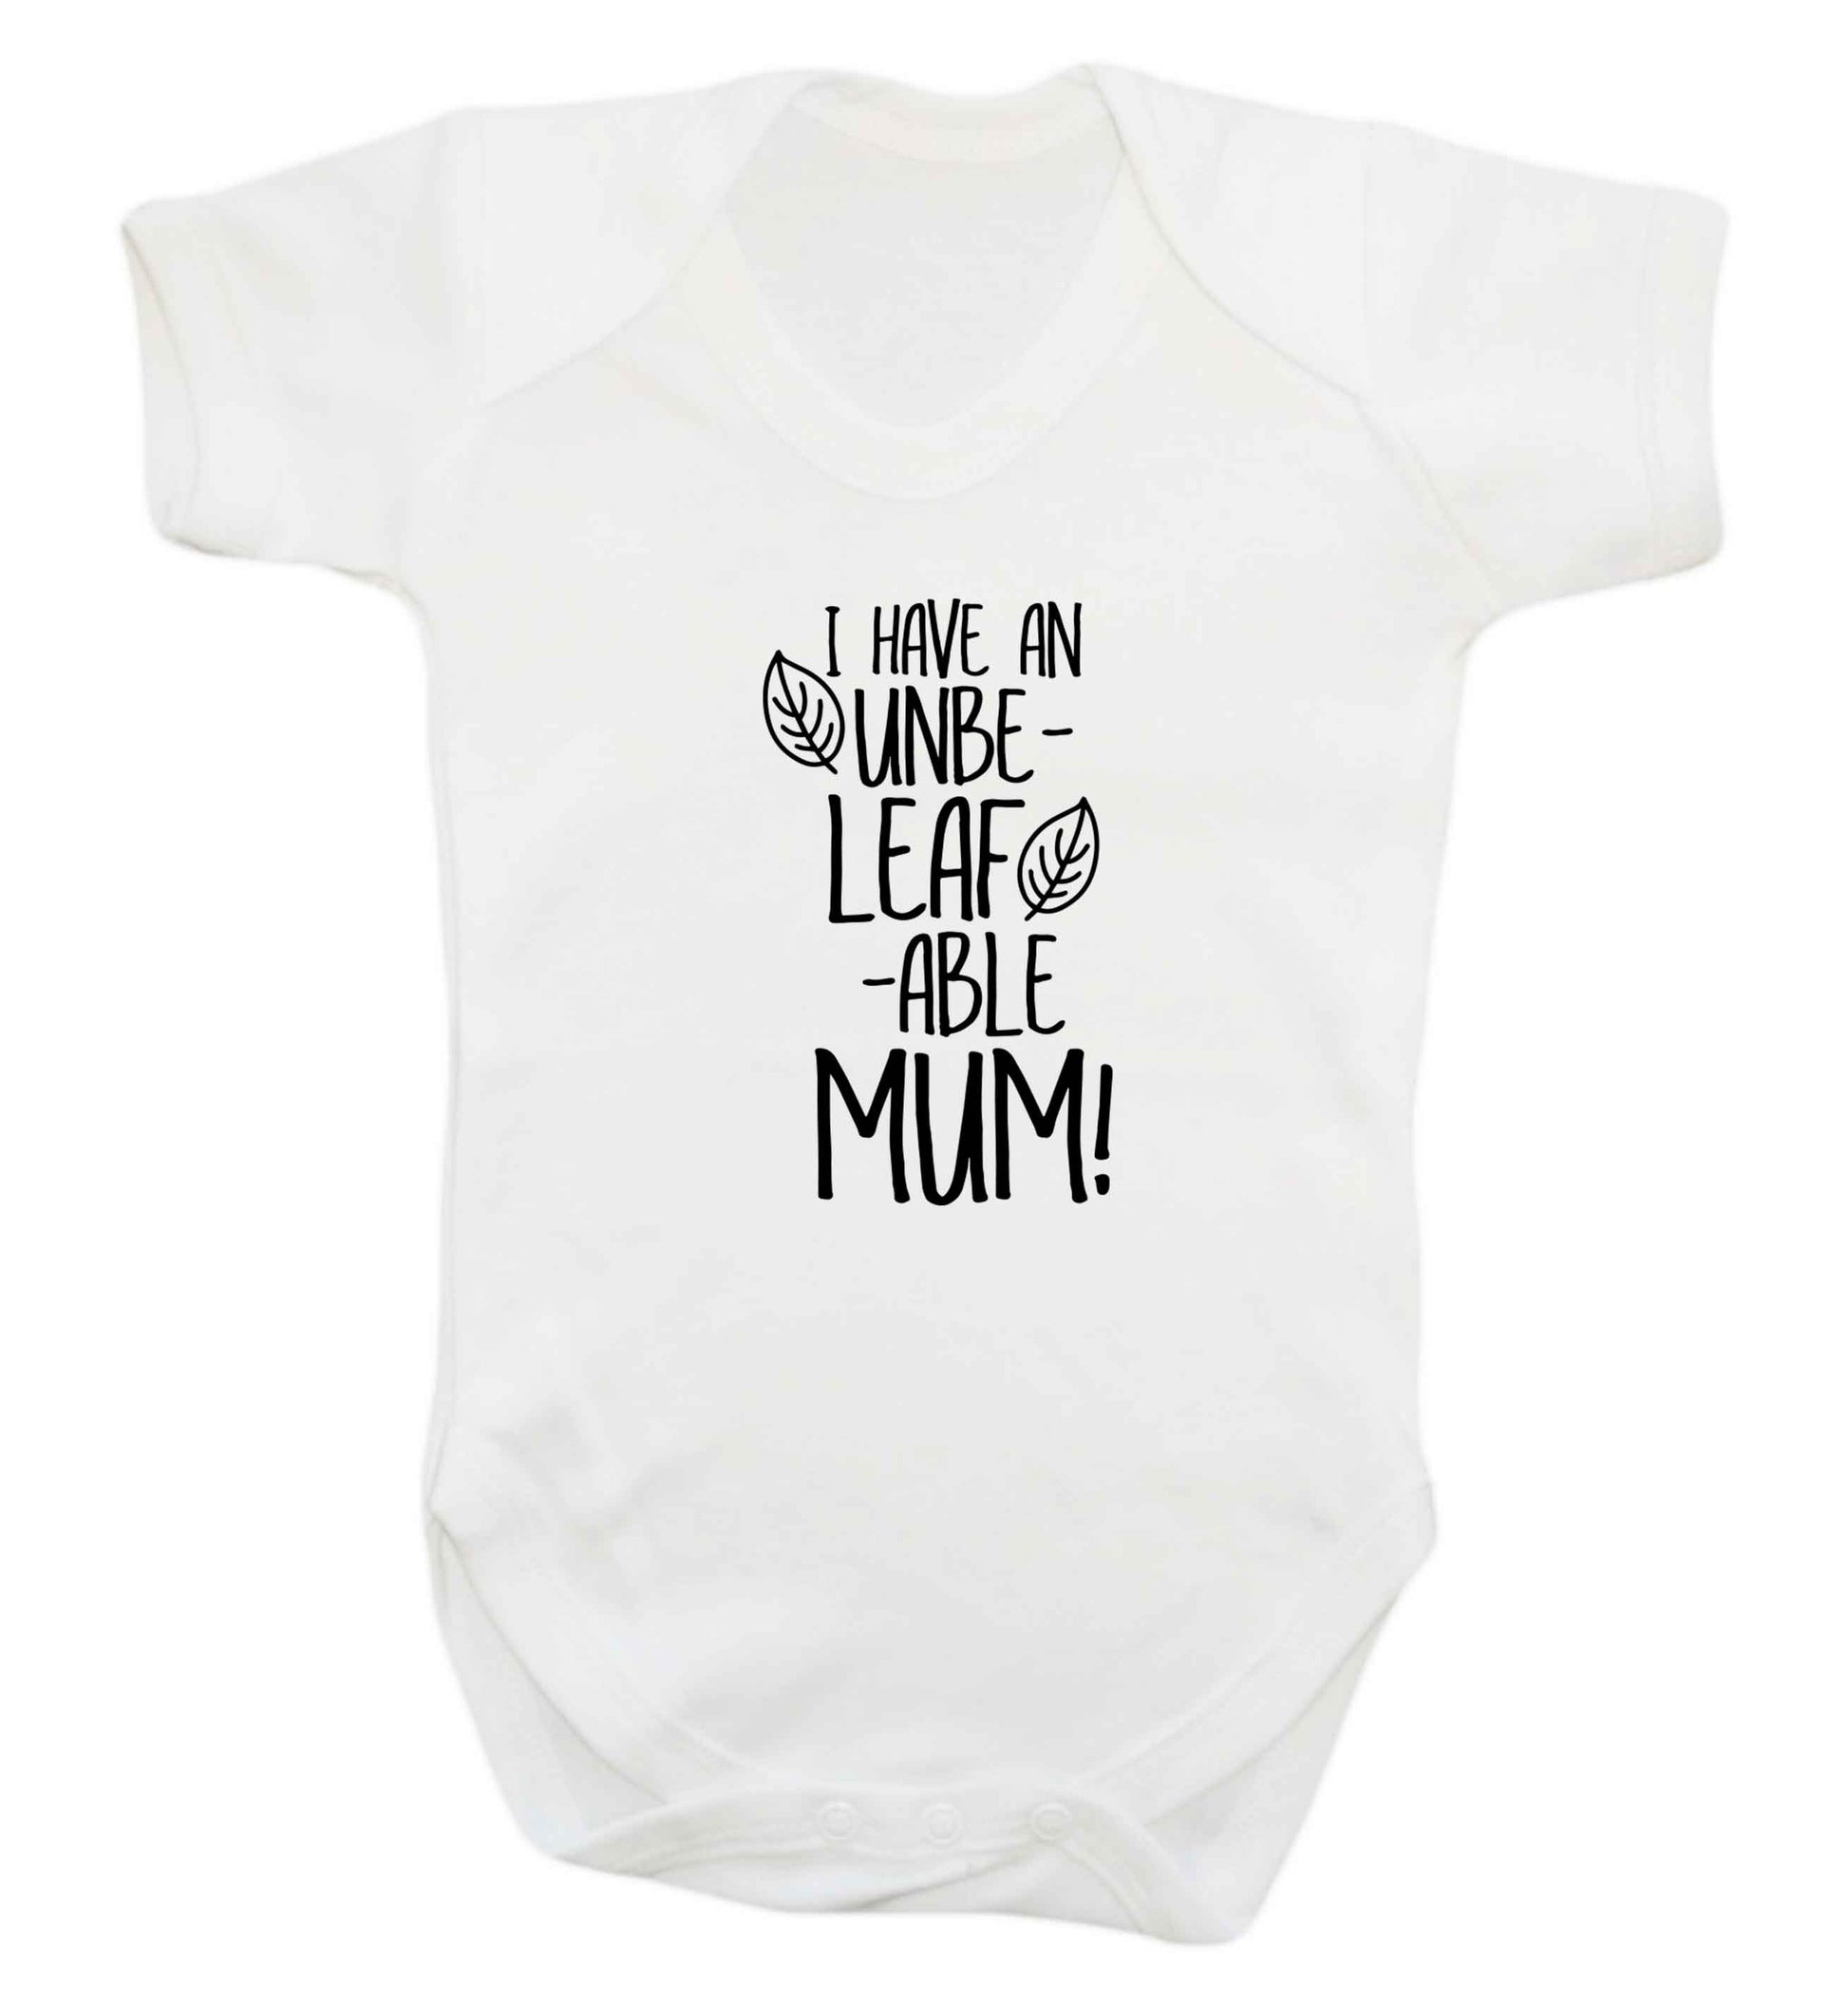 I have an unbeleafable mum! baby vest white 18-24 months